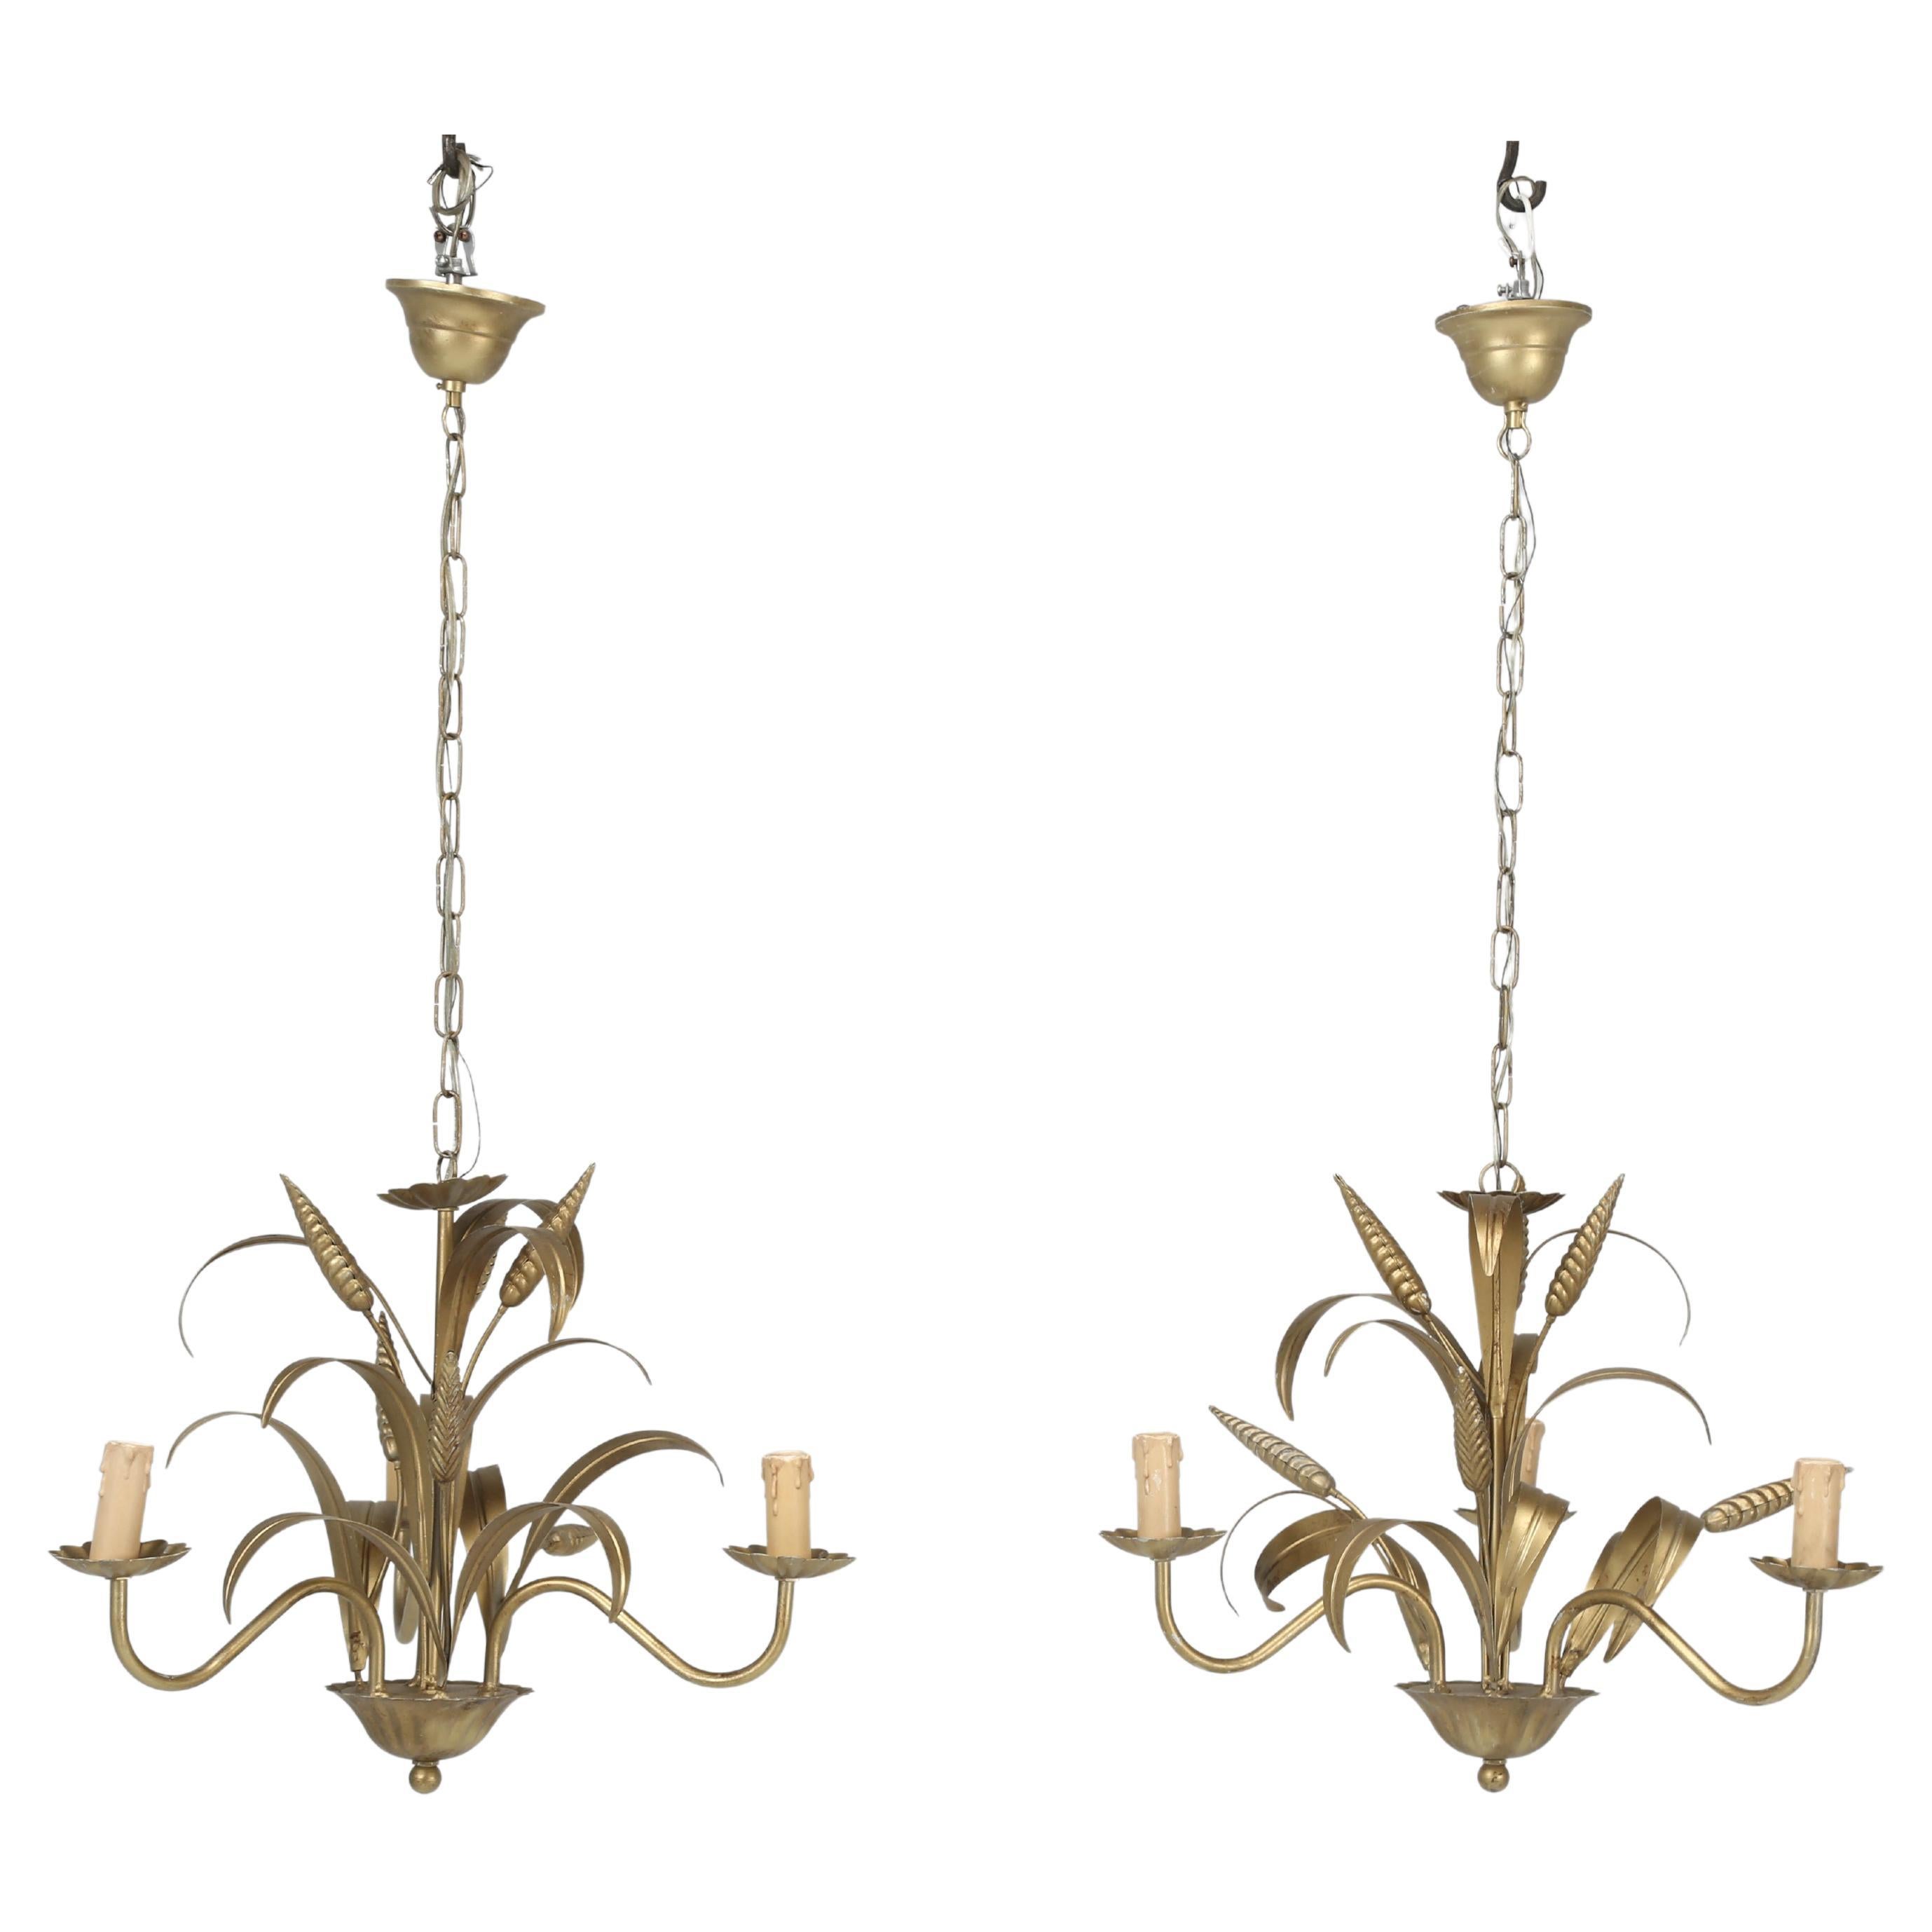 Pair of Italian Midcentury Coco Chanel Style Chandeliers C 1960s in Old Gilding For Sale